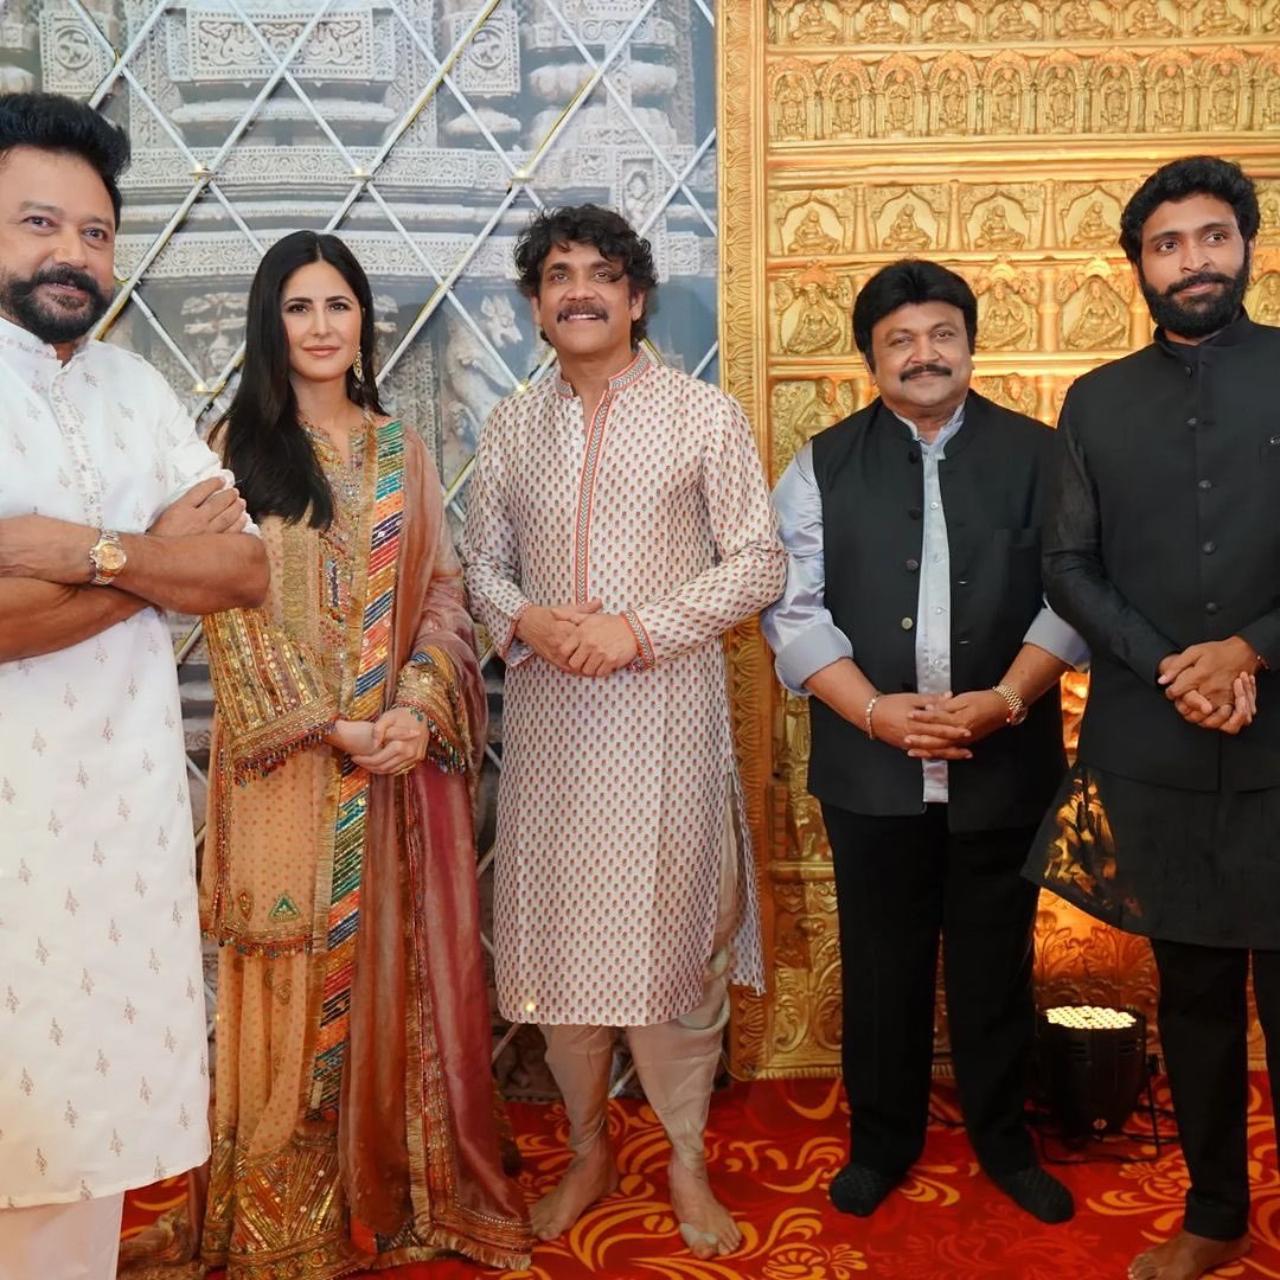 The event was organised by the owner of Kalyan jewellers, one of the leading jewellery brands in the country. The event was also attended by several south stars including Jayaram, Prabhu Ganeshan, R Madhavan, Bengali actress Ritabhari Chakraborty, among others